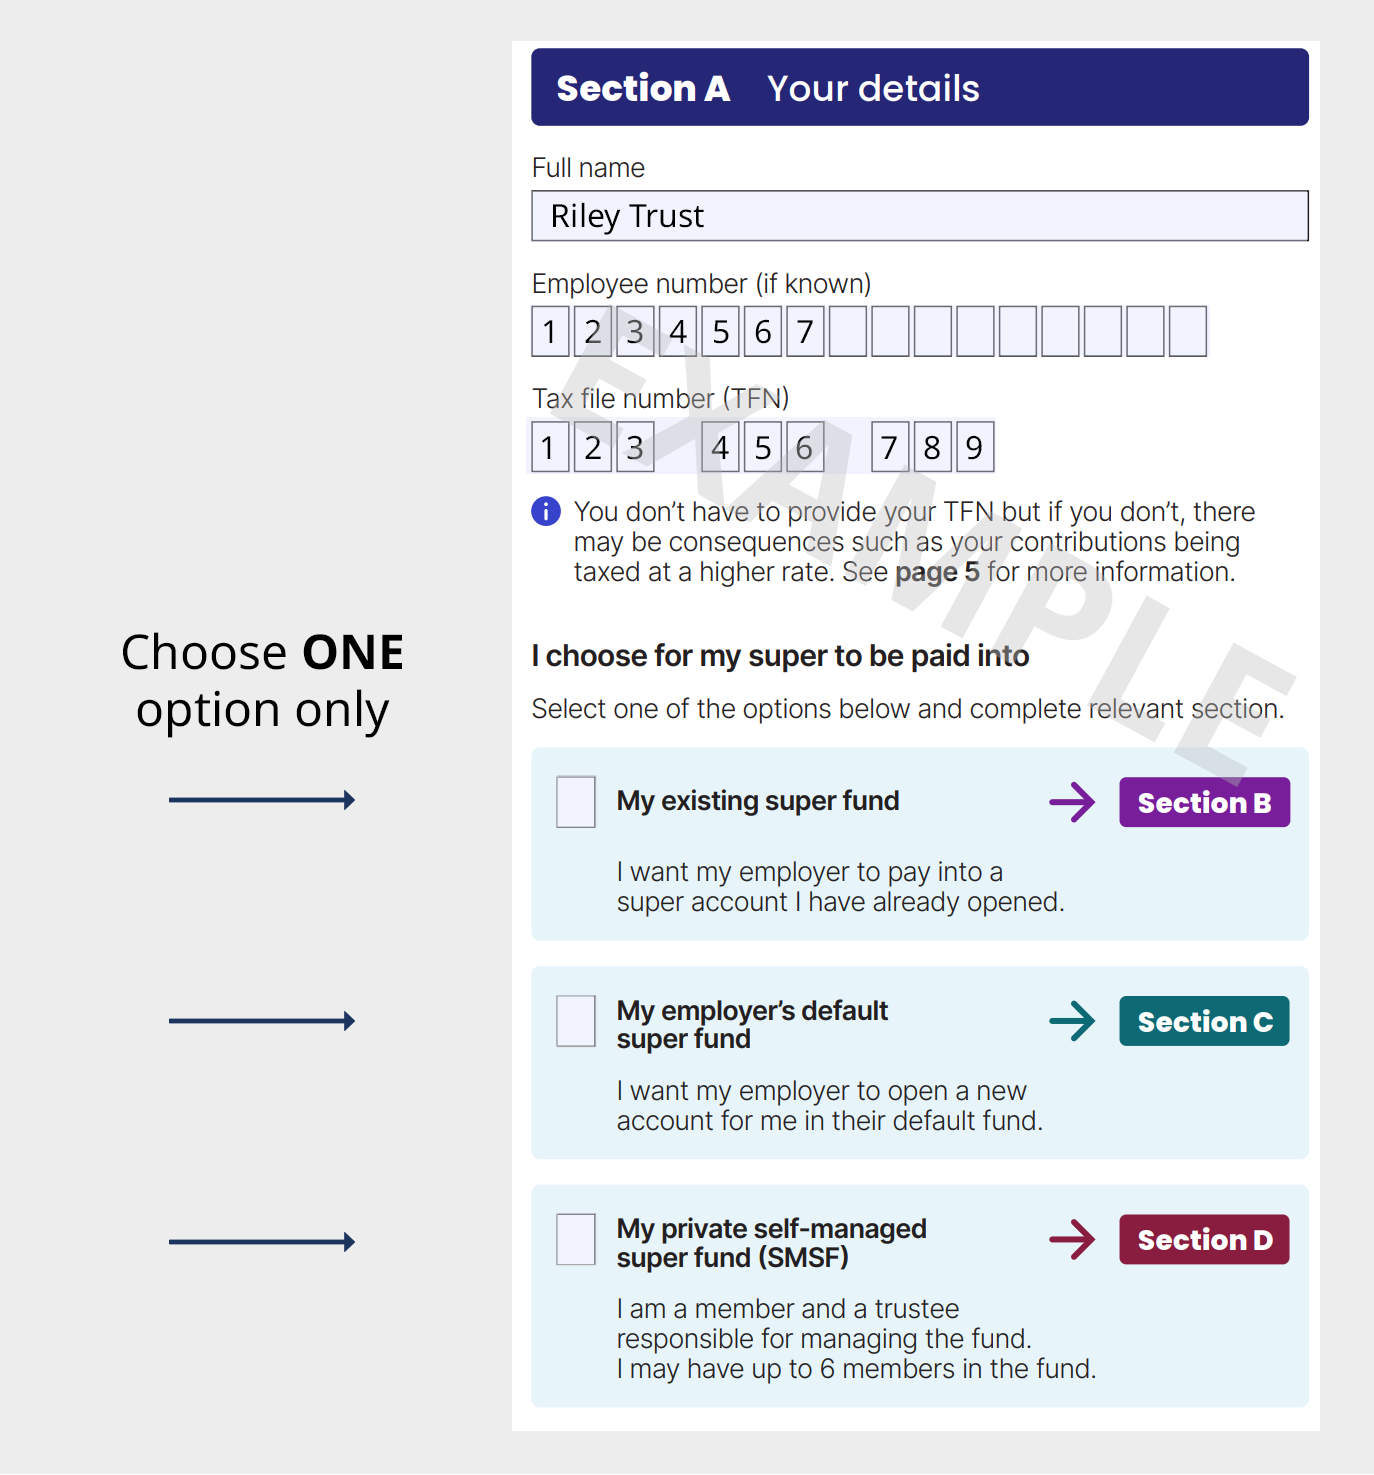 Screenshot of Section A for the Superannuation Standard Choice Form